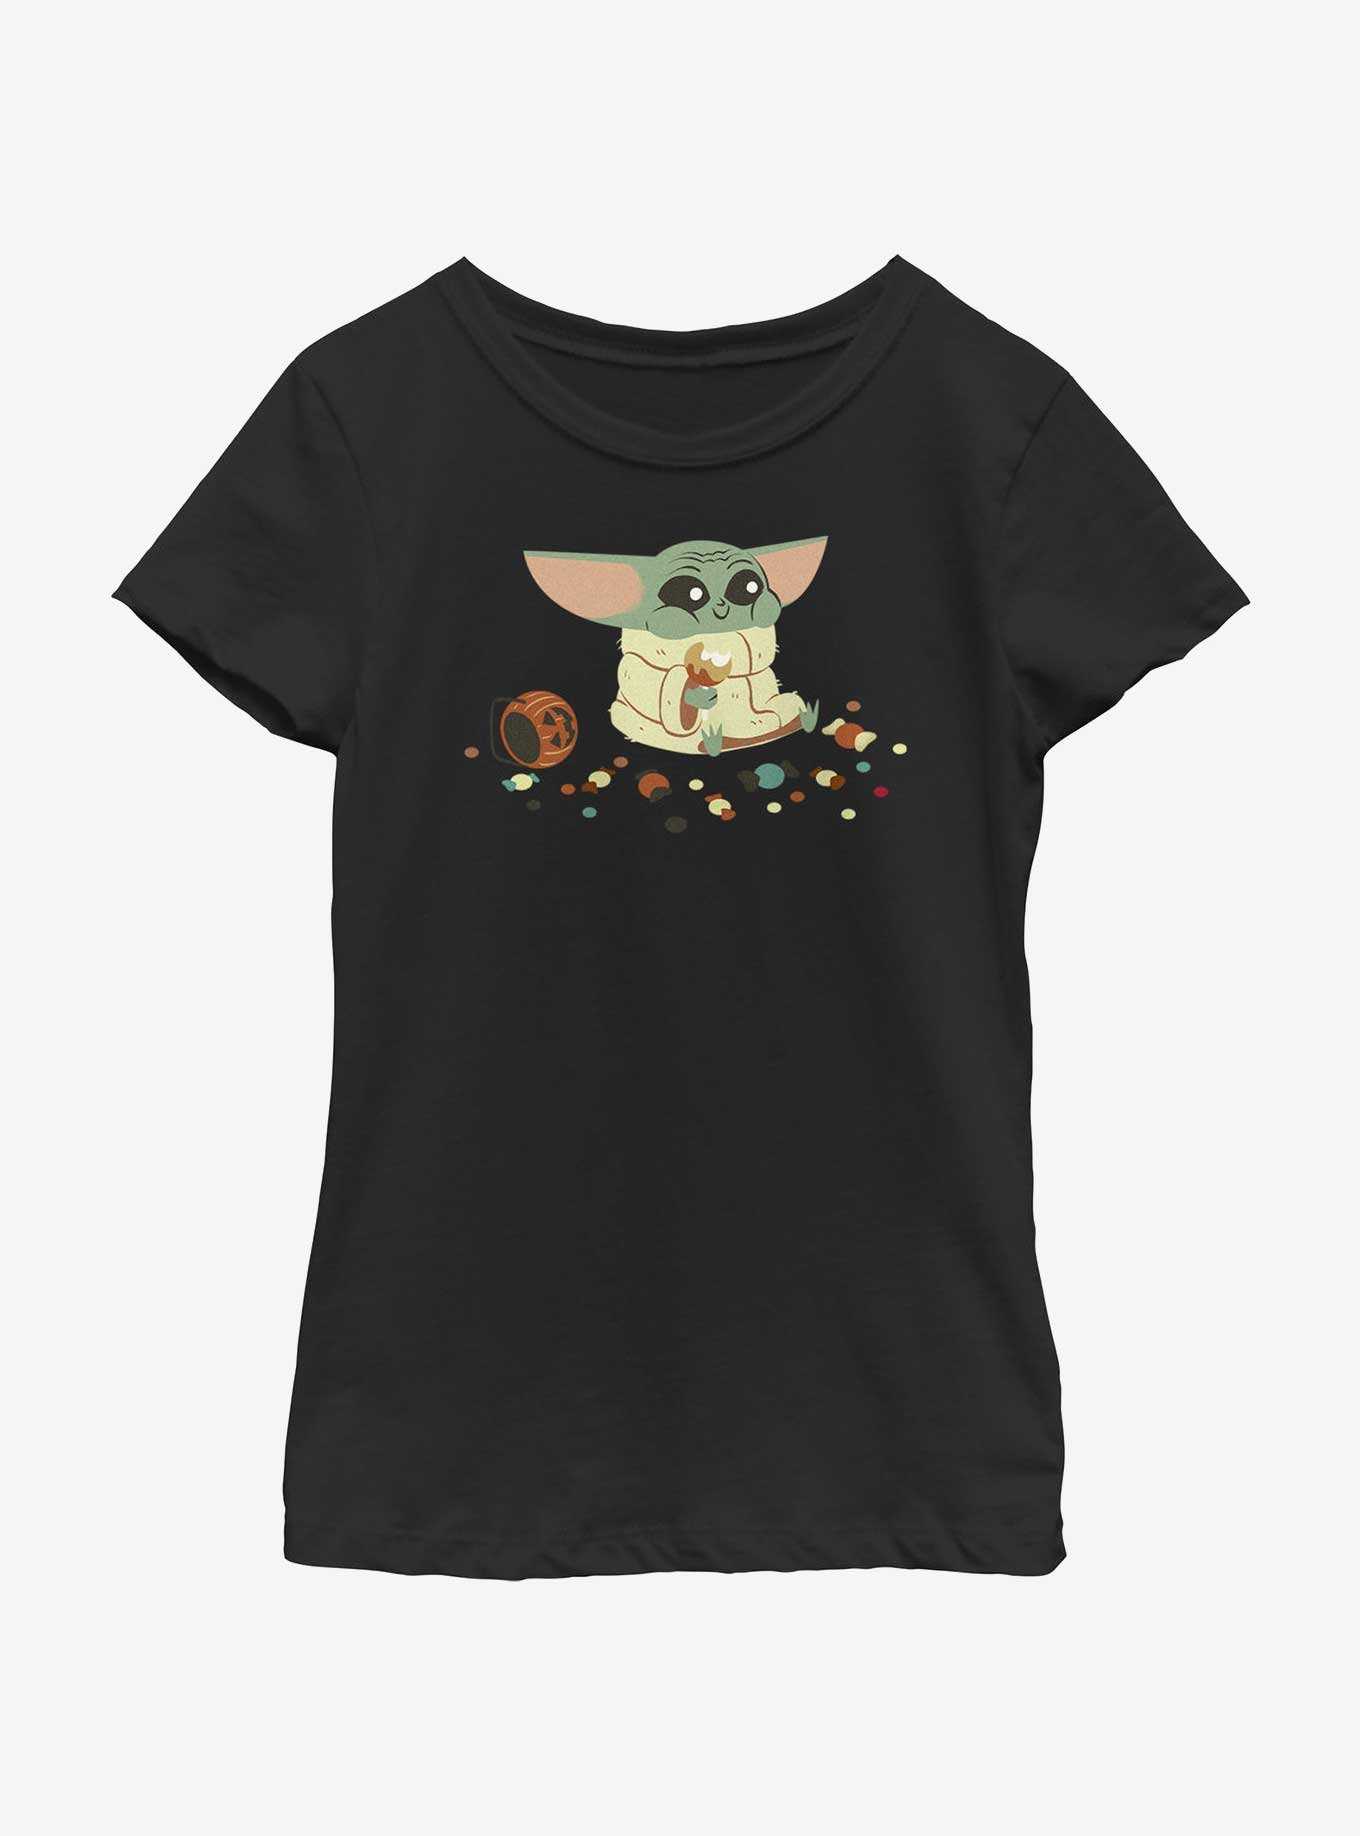 Star Wars The Mandalorian The Child Eating Candy Youth Girls T-Shirt, , hi-res